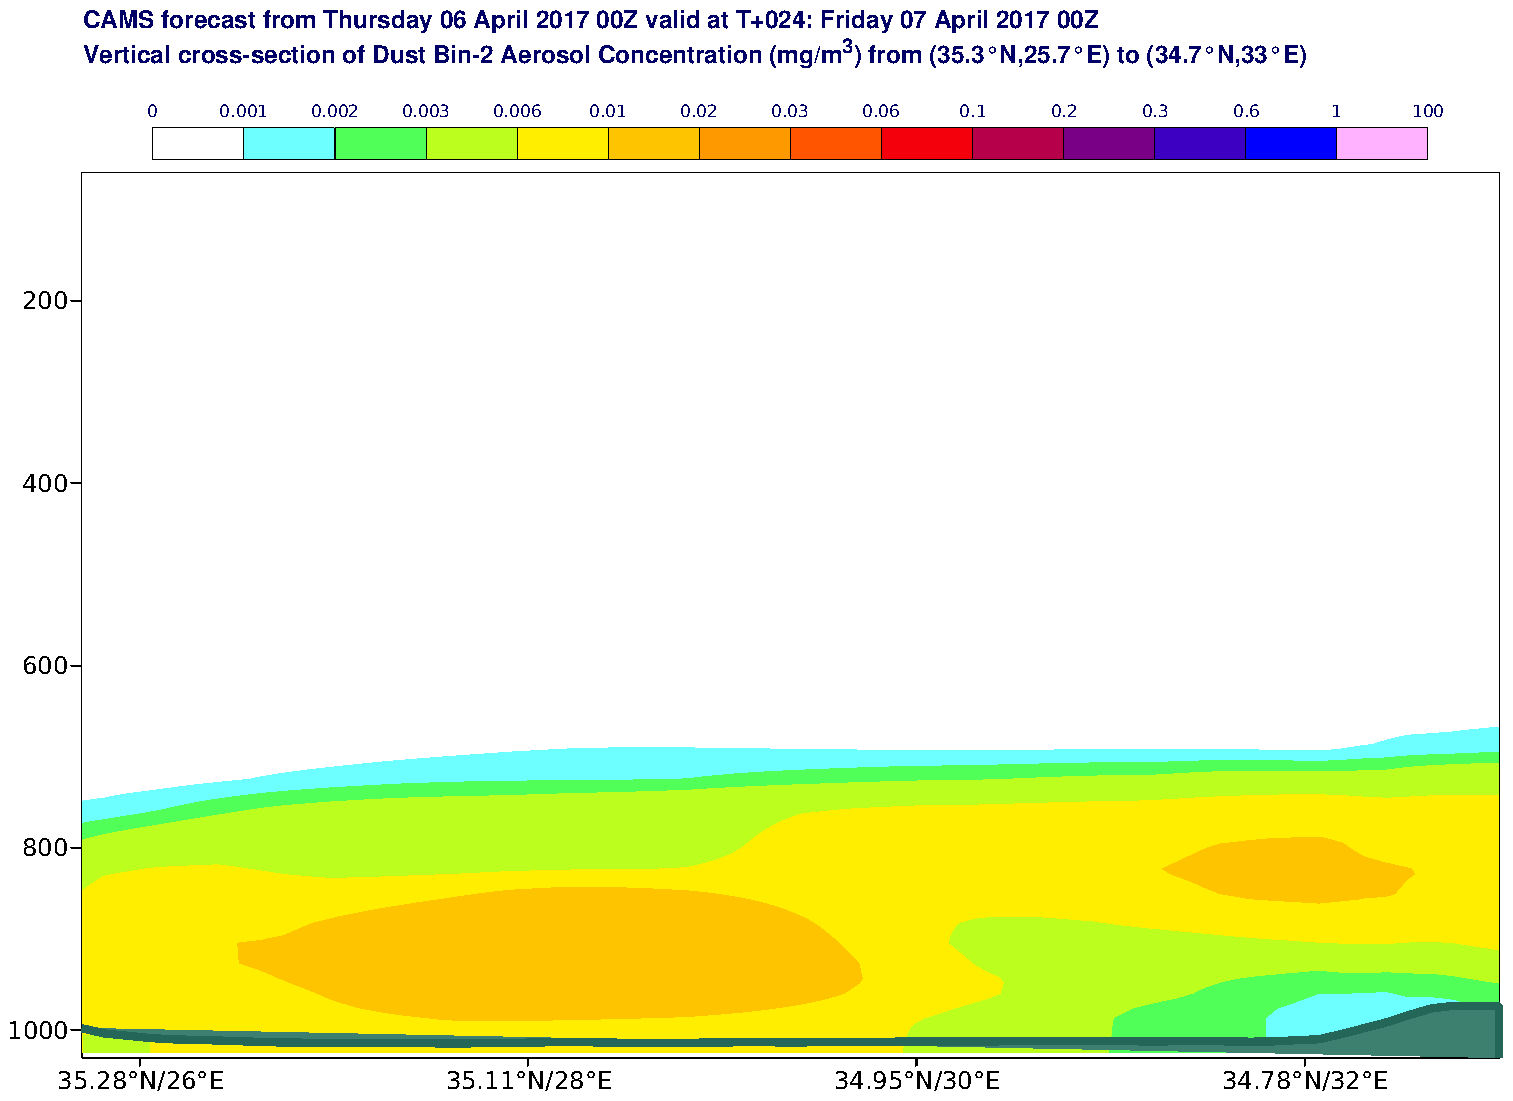 Vertical cross-section of Dust Bin-2 Aerosol Concentration (mg/m3) valid at T24 - 2017-04-07 00:00